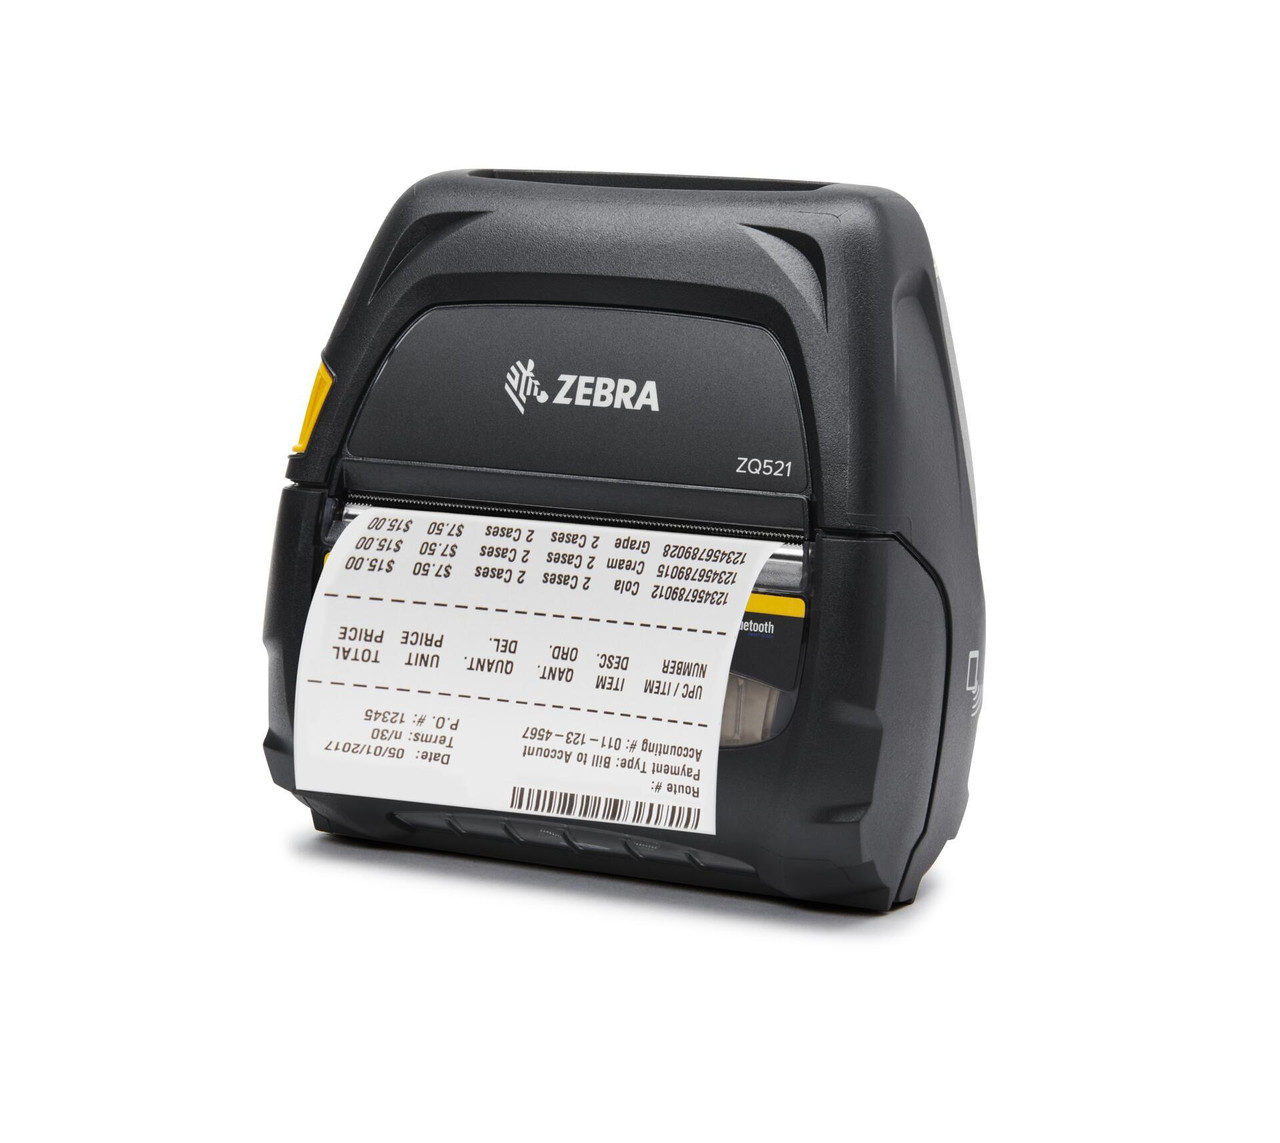 ZEBRA ZT411 300 dpi Thermal Transfer and Direct Thermal Industrial Printer Ethernet, Bluetooth, Serial, USB, Connectivity, 14 IPS, 4-inch Print Widt - 2